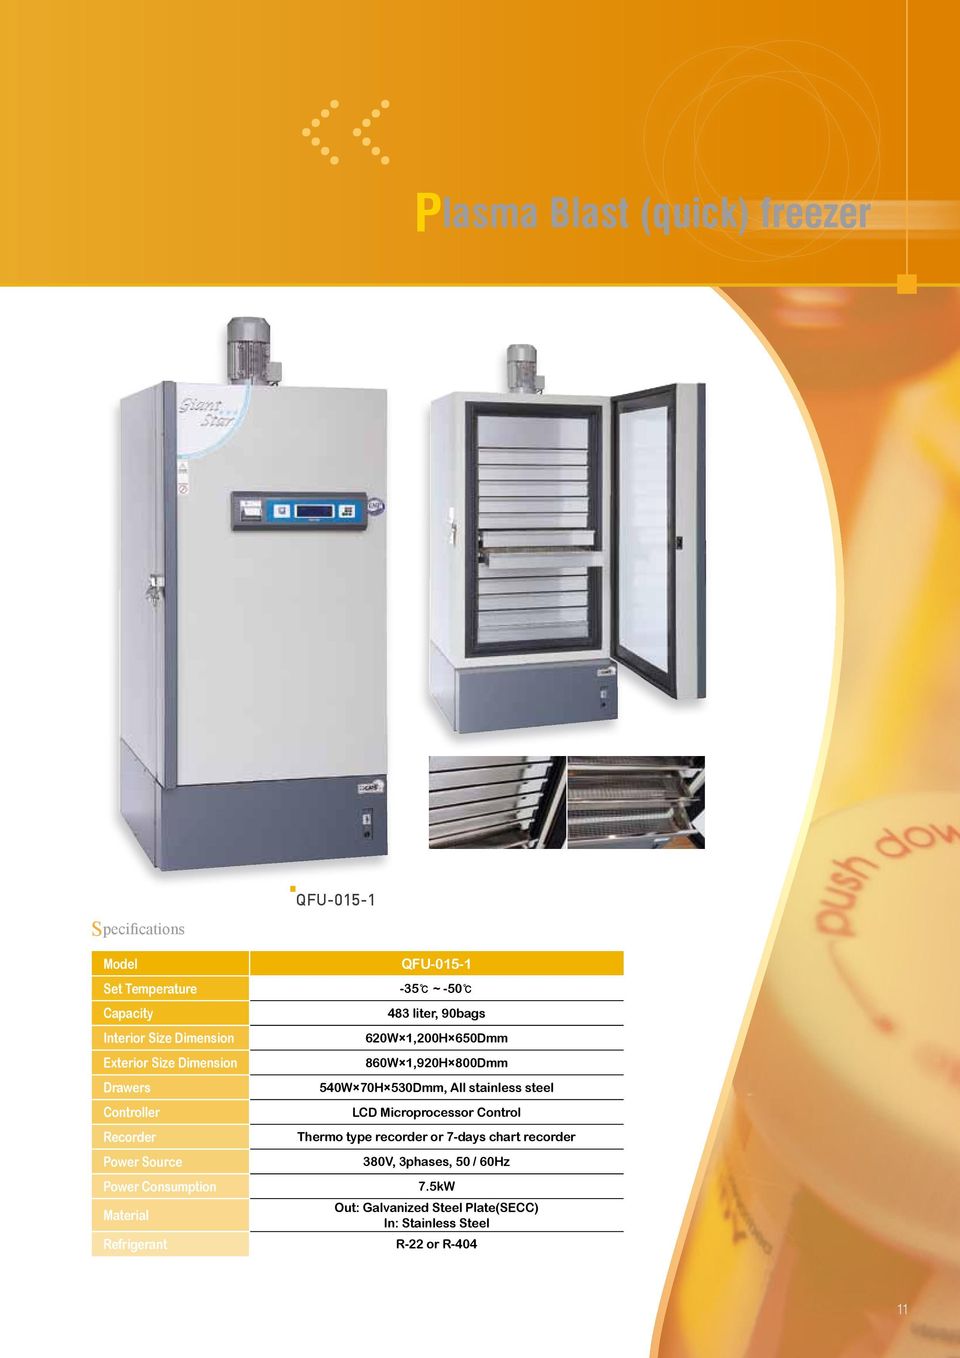 800Dmm 540W 70H 530Dmm, All stainless steel LCD Microprocessor Control Thermo type recorder or 7-days chart